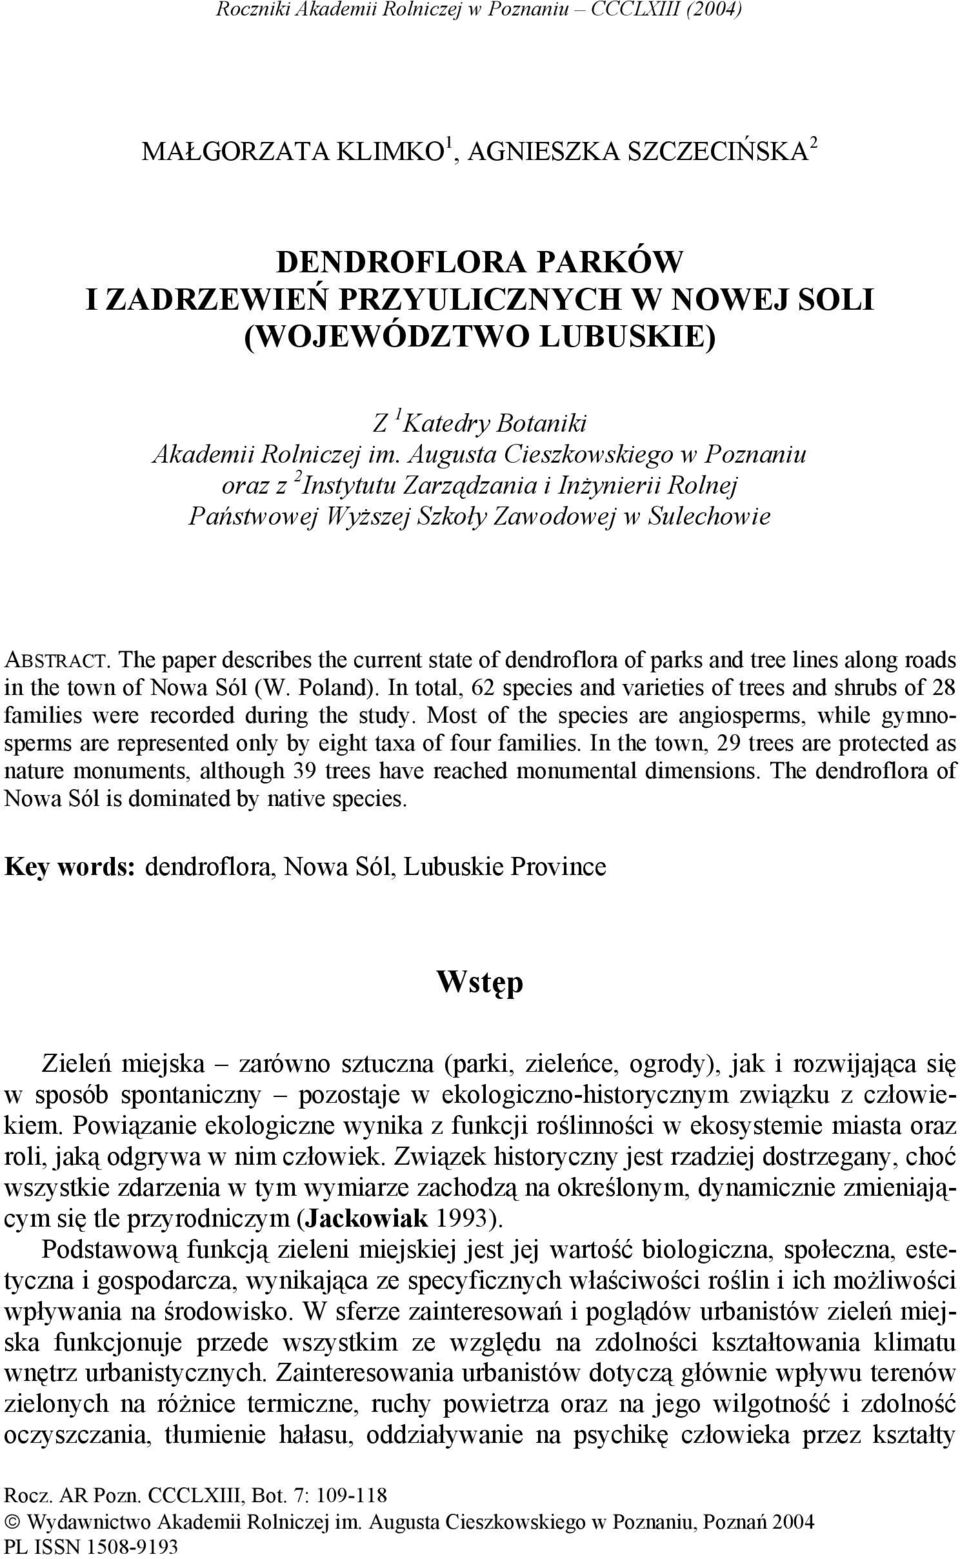 The paper describes the current state of dendroflora of parks and tree lines along roads in the town of Nowa Sól (W. Poland).